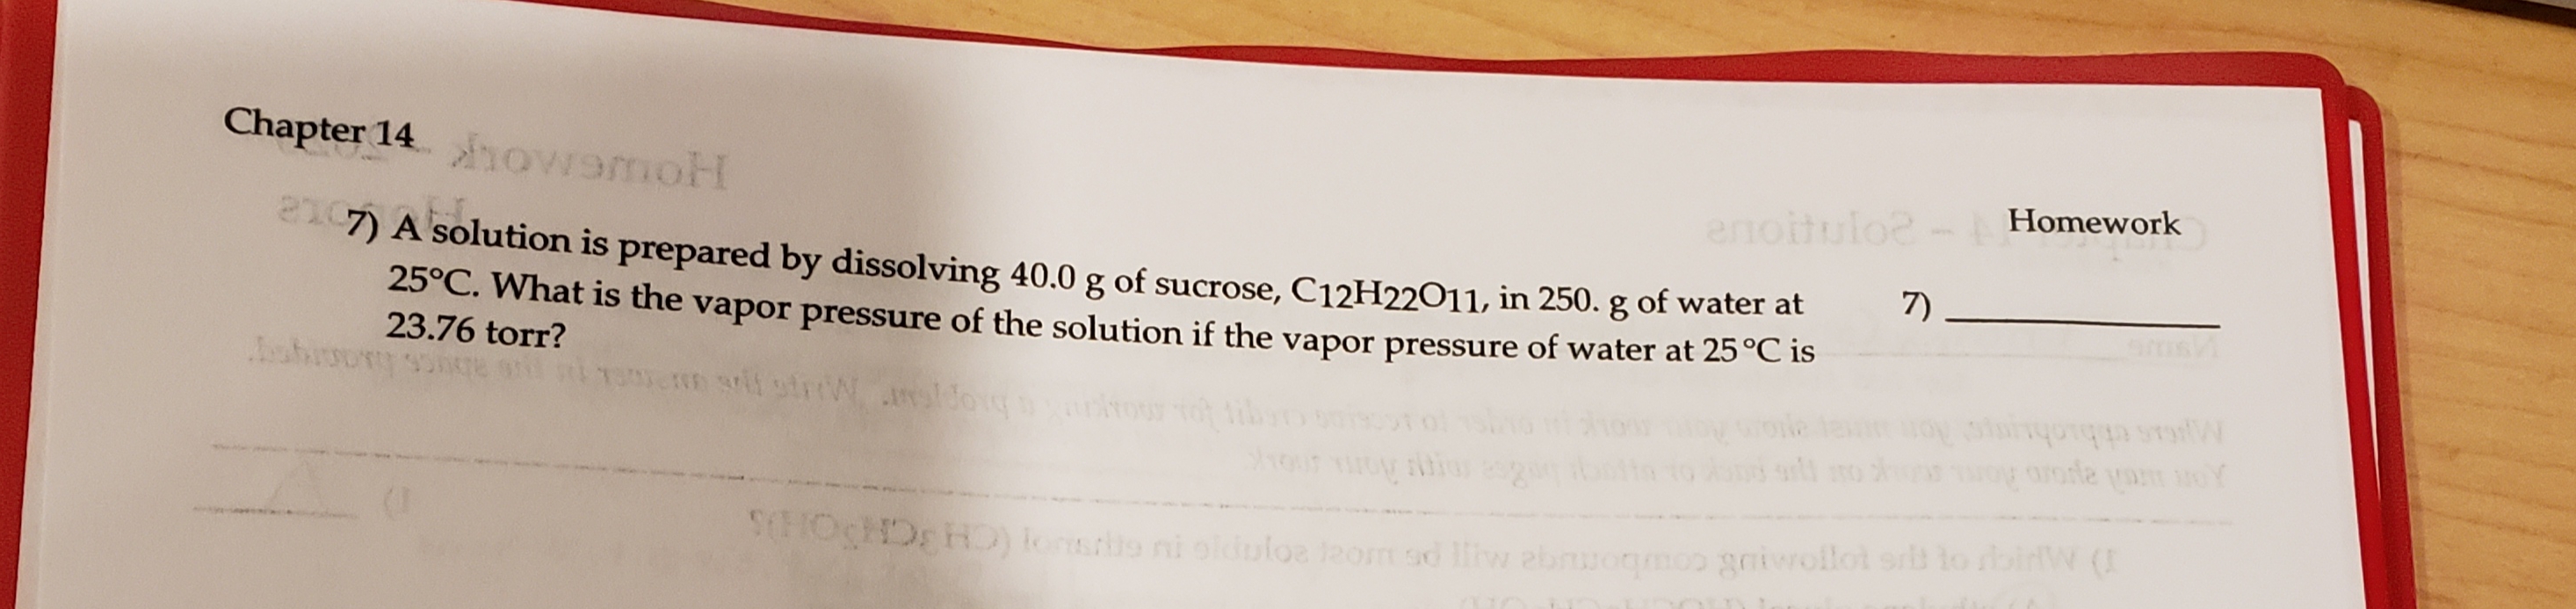 Chapter 14owamoH
Homework
enoitulo?
210
7)
7) A solution is prepared by dissolving 40.0 g of sucrose, C12H22O11, in 250. g of water at
25°C. What is the vapor pressure of the solution if the vapor pressure of water at 25°C is
23.76 torr?
Ms ethiohuns Aor
OCDHD) lonsro ni olduloe lzom sd liiw ebnuogmoo gaiwollot sr lo rbinW (
